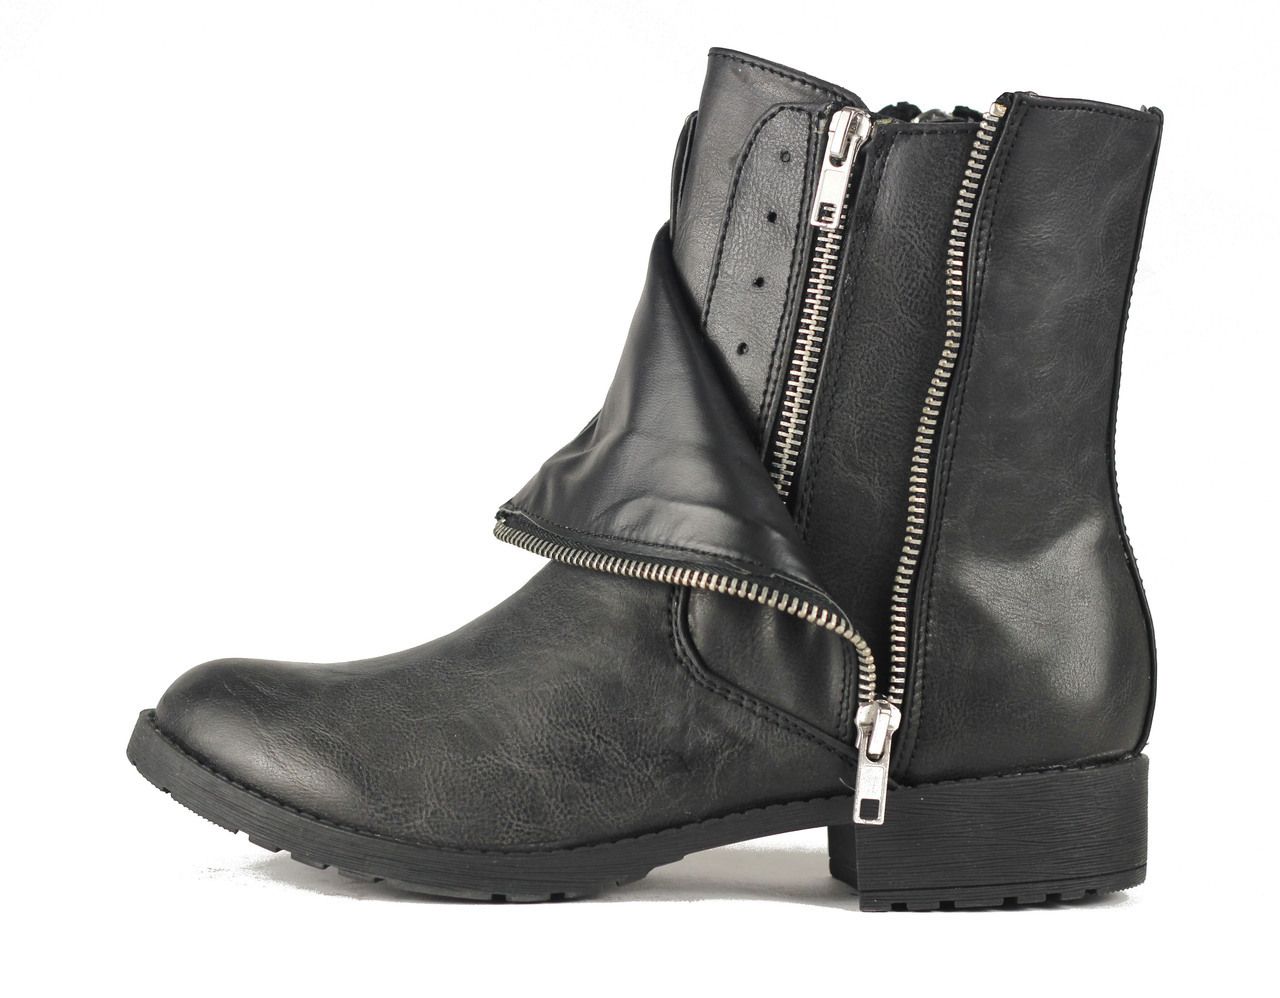 MIA Limited Edition for Women: Iva Black Boot Y258 BLK - Shiekh